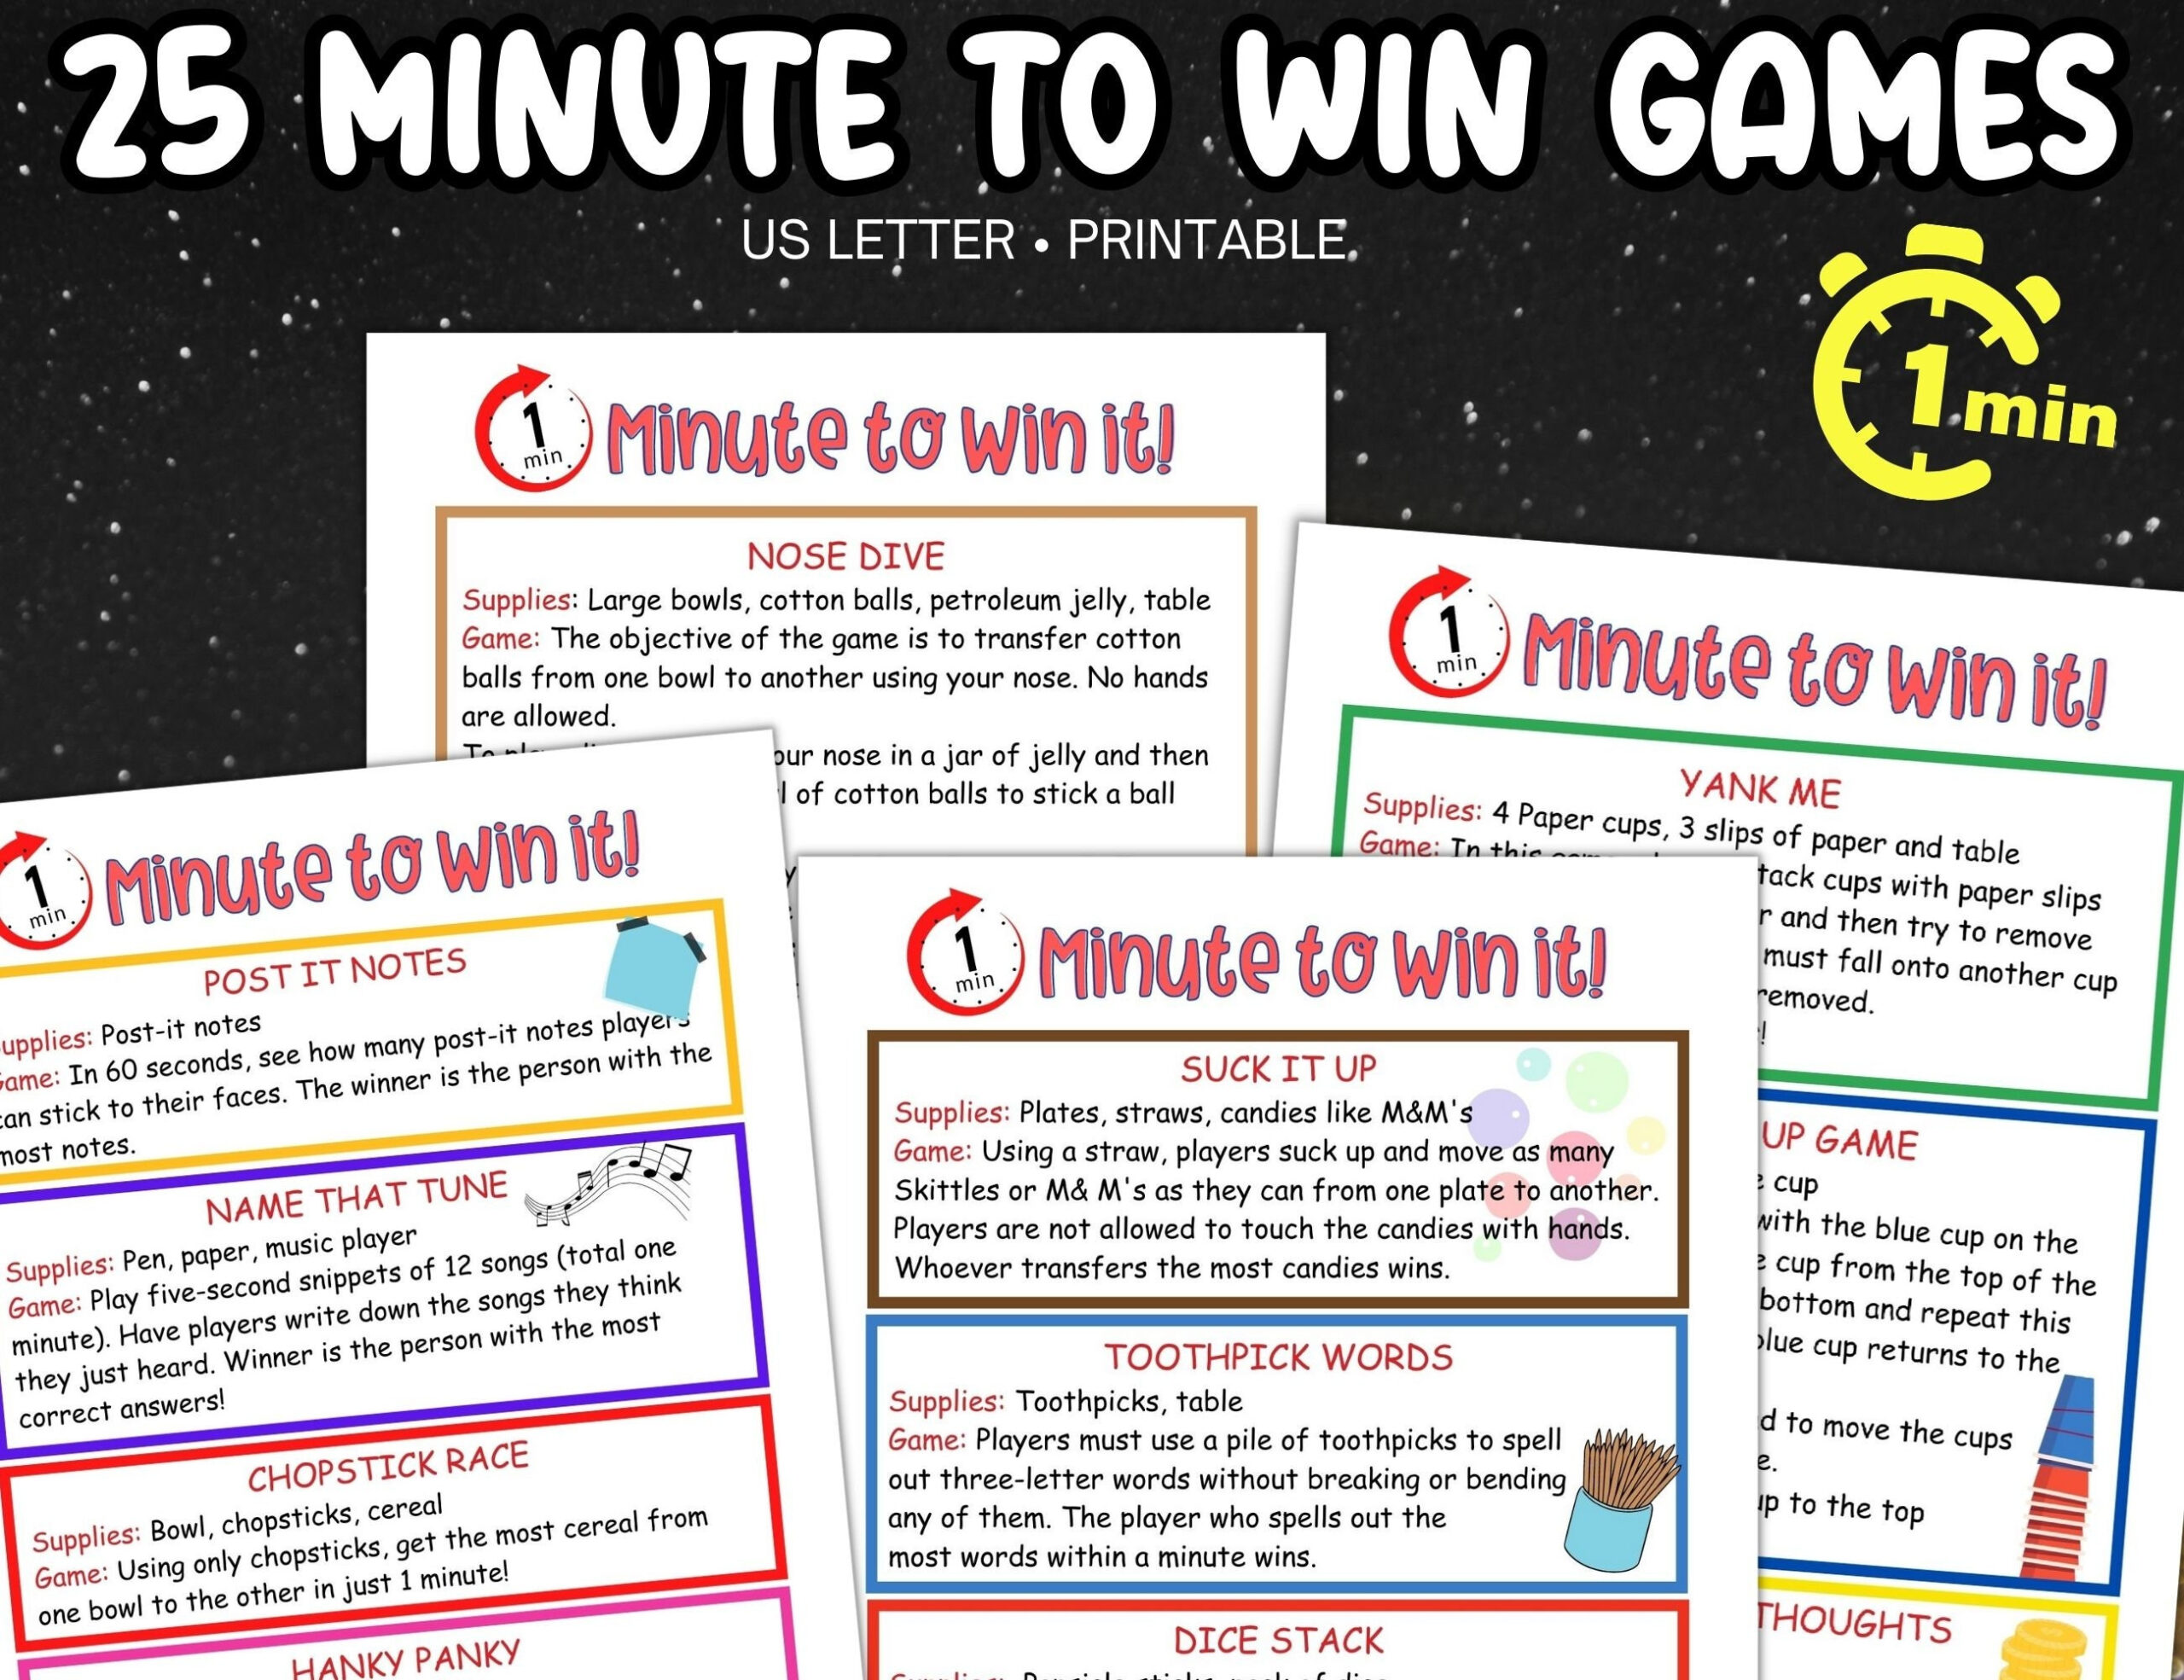 Minute To Win It Games, Fun Party Games For Kids Adults, Family inside Free Printable Minute to Win It Invitations